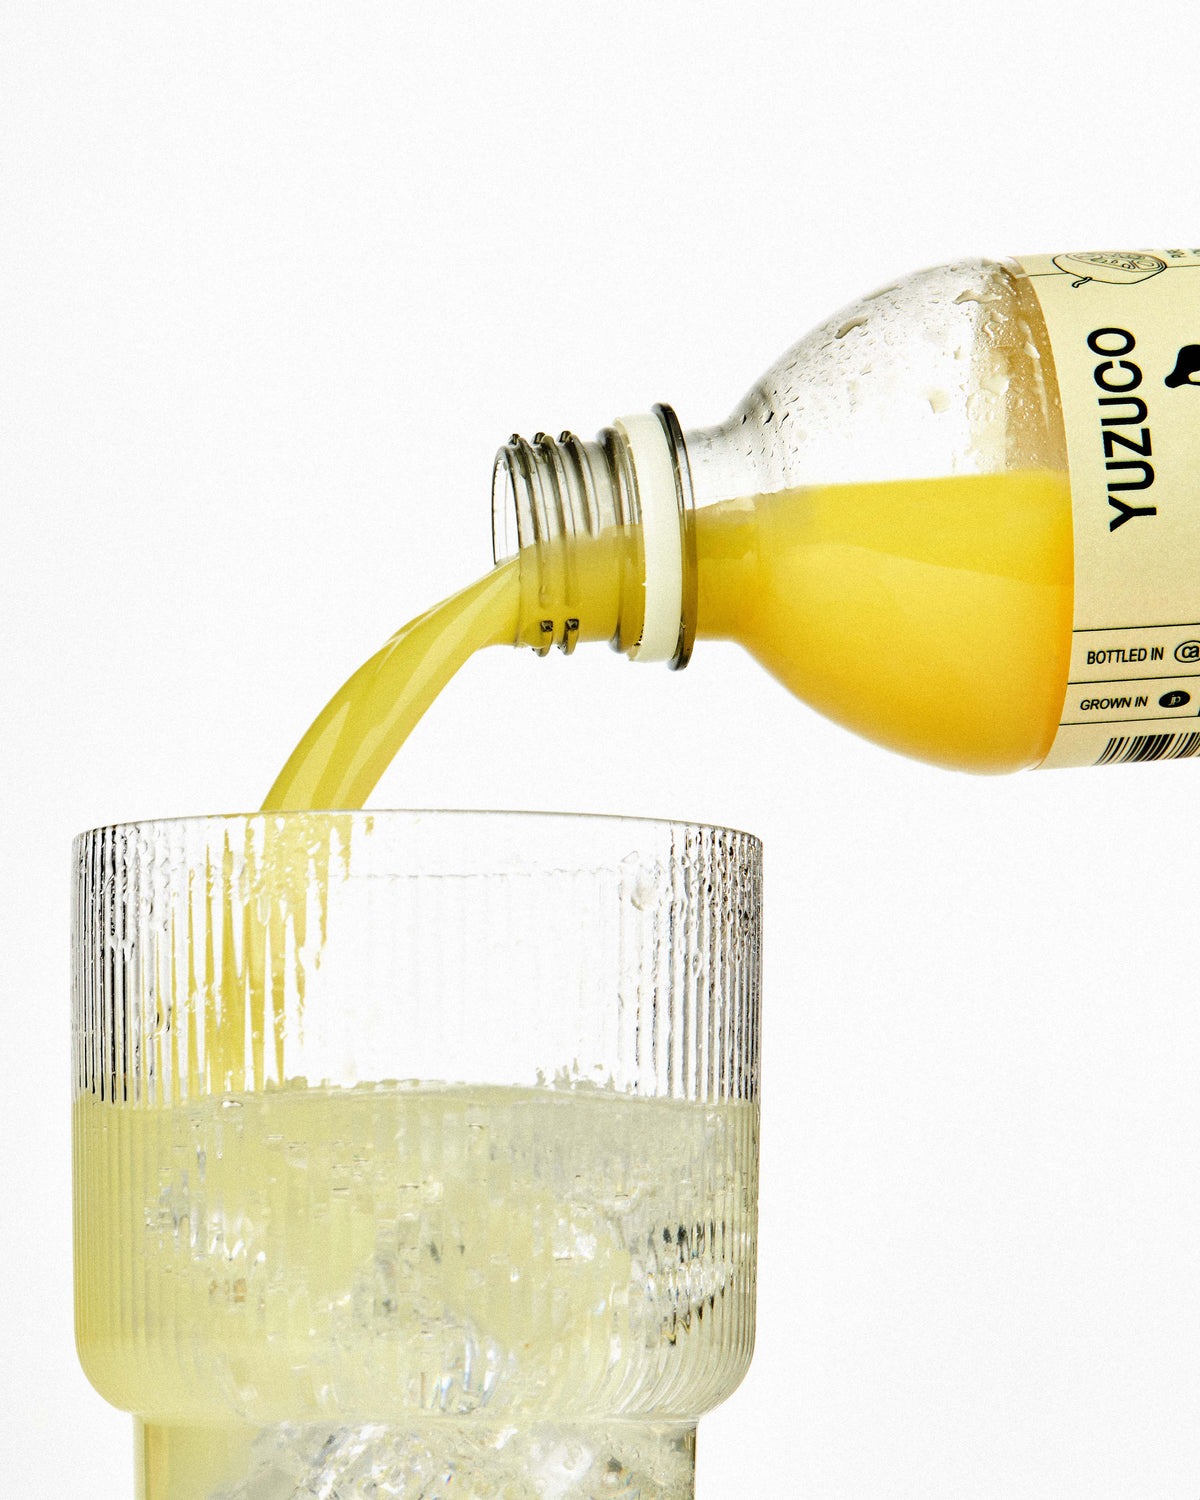 100% yuzu juice pouring into a glass with sparkling water and ice